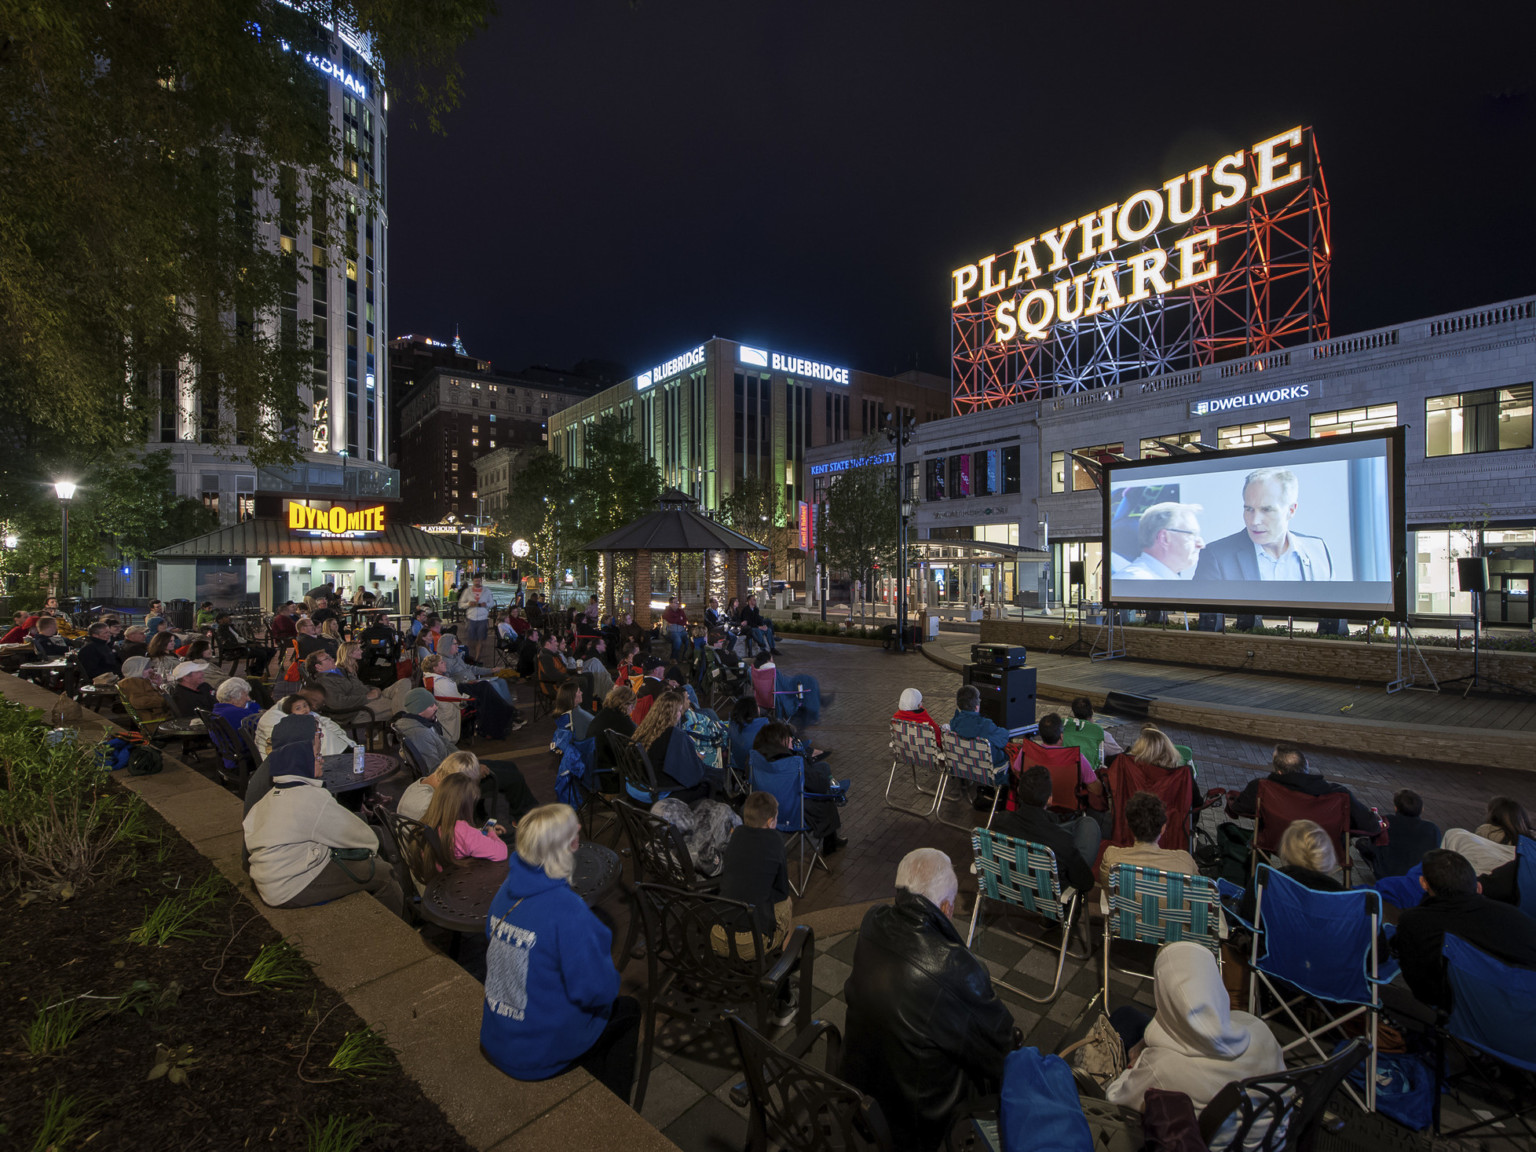 Audience sits on the street watching an outdoor movie on a screen. A Playhouse Square sign is illuminated in the background